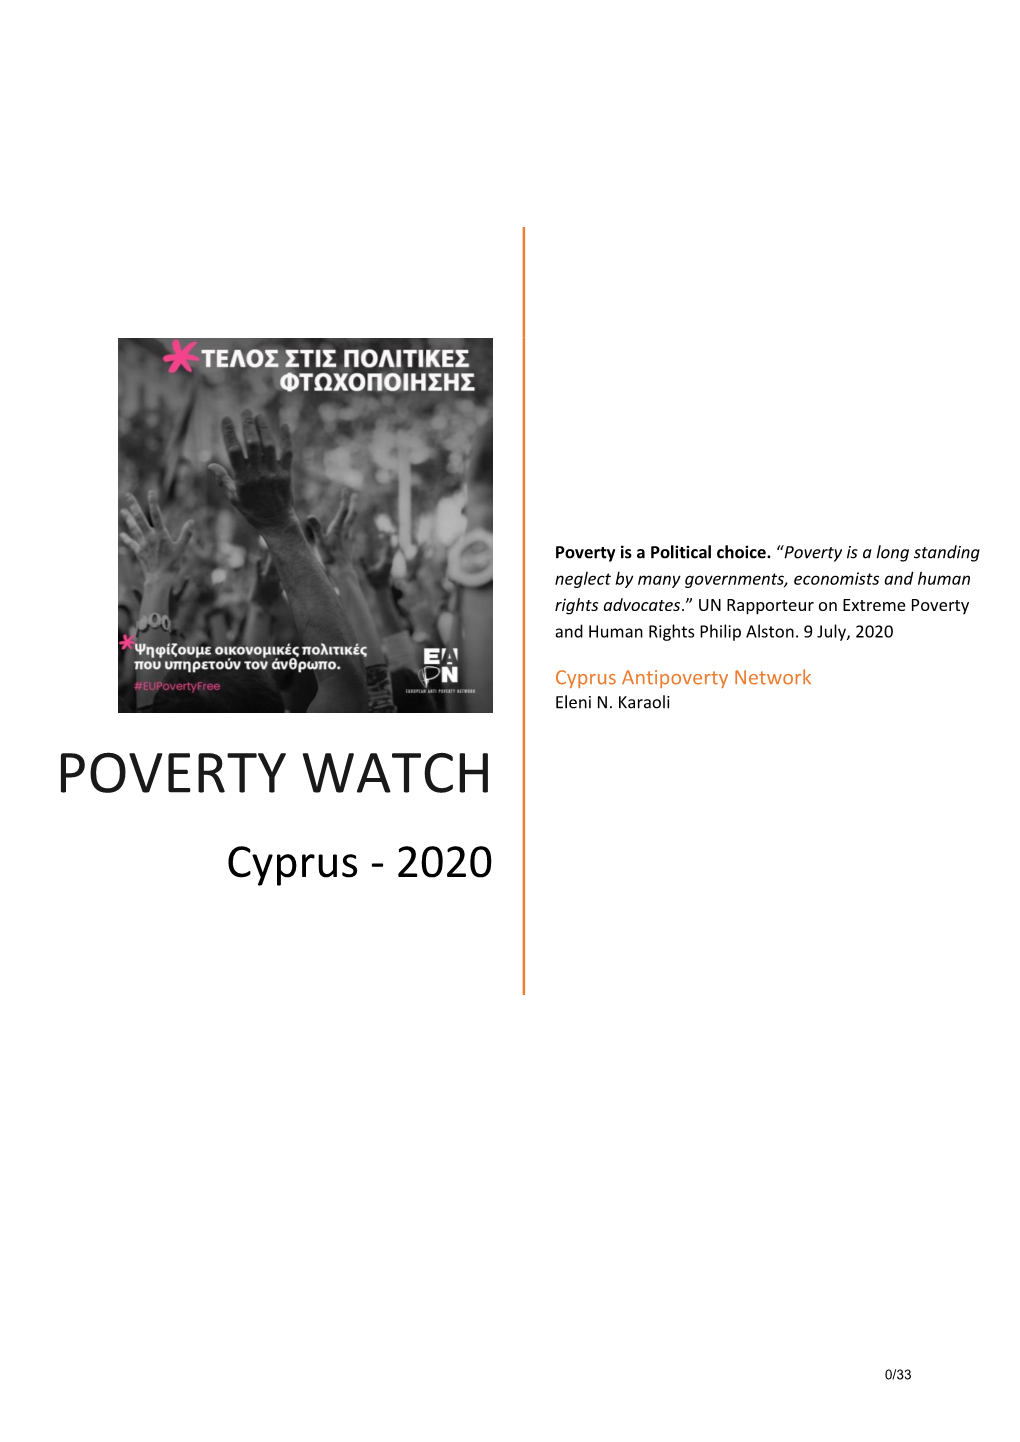 Read the Cyprus Poverty Watch